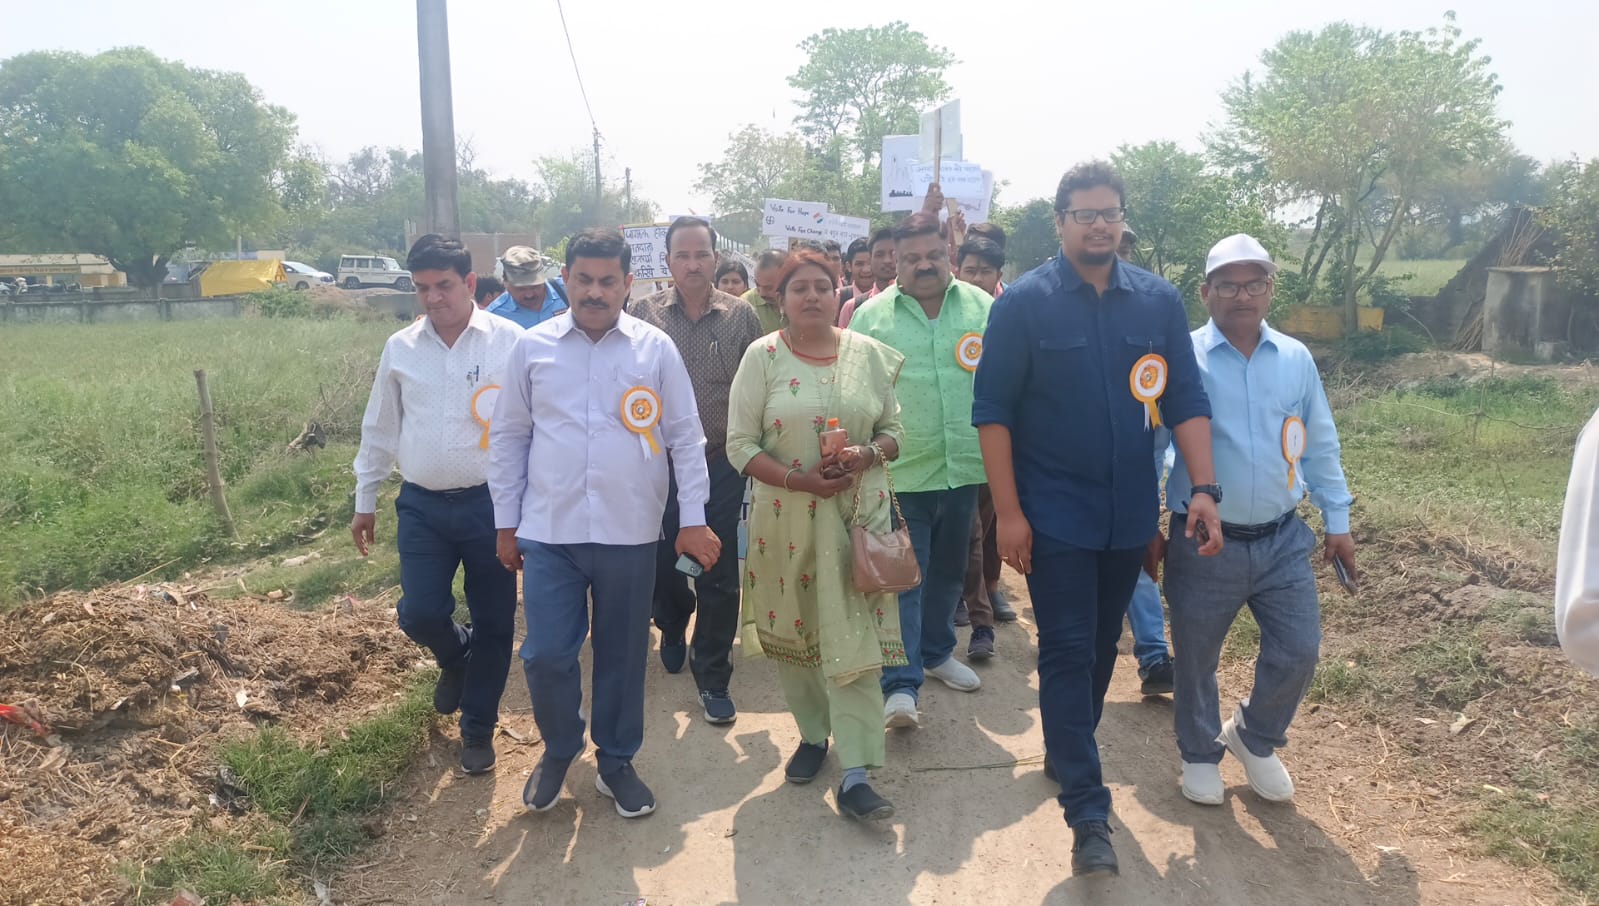 On the fourth day of the seven-day special camp being run in village Ranjitpur by the National Service Scheme under MLK PG College, Balrampur, a voter awareness rally was organized to motivate the villagers to vote.